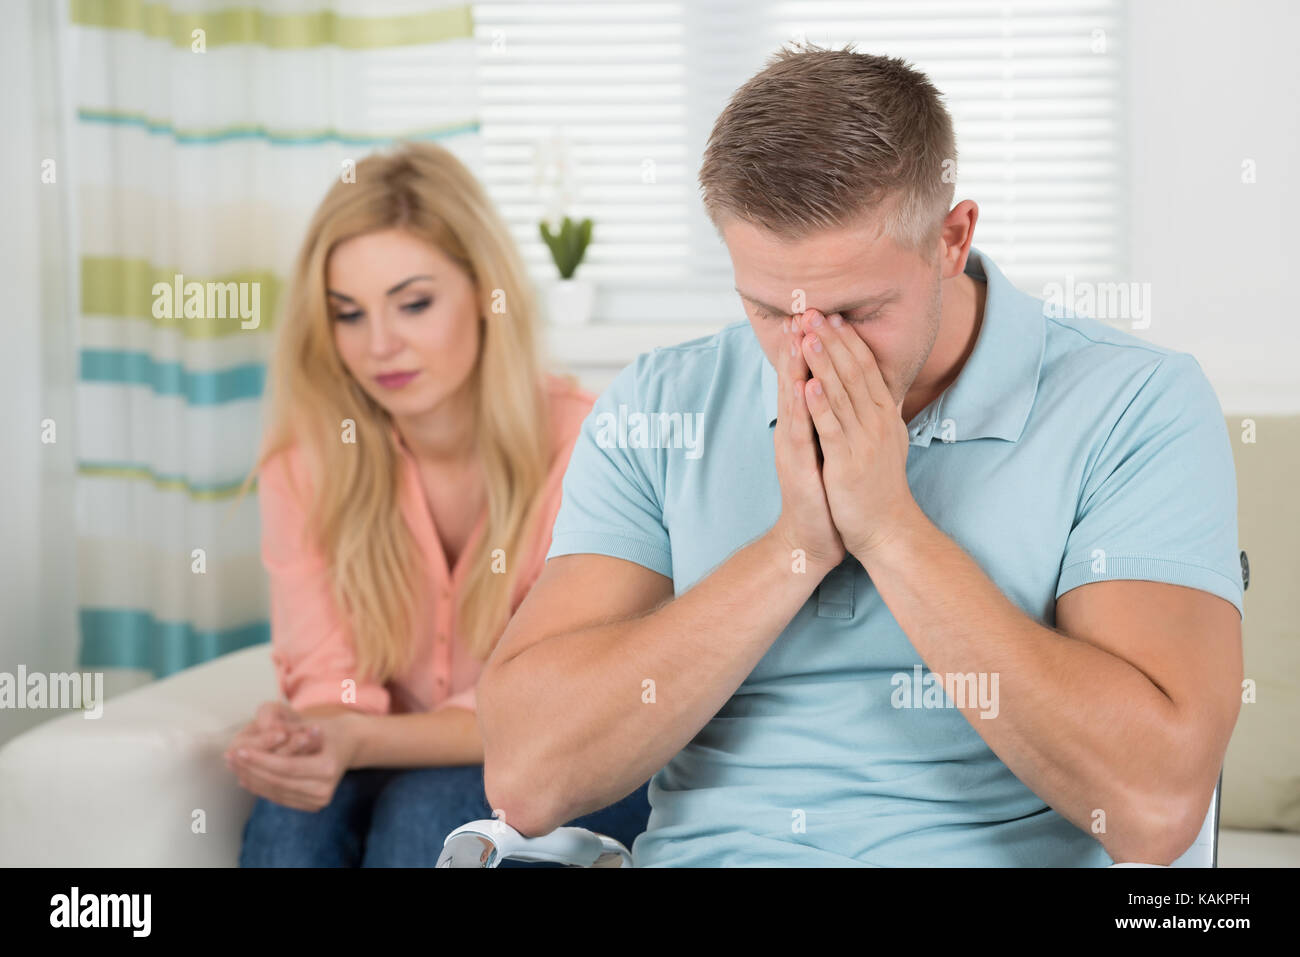 Unhappy young couple having argument at home Stock Photo